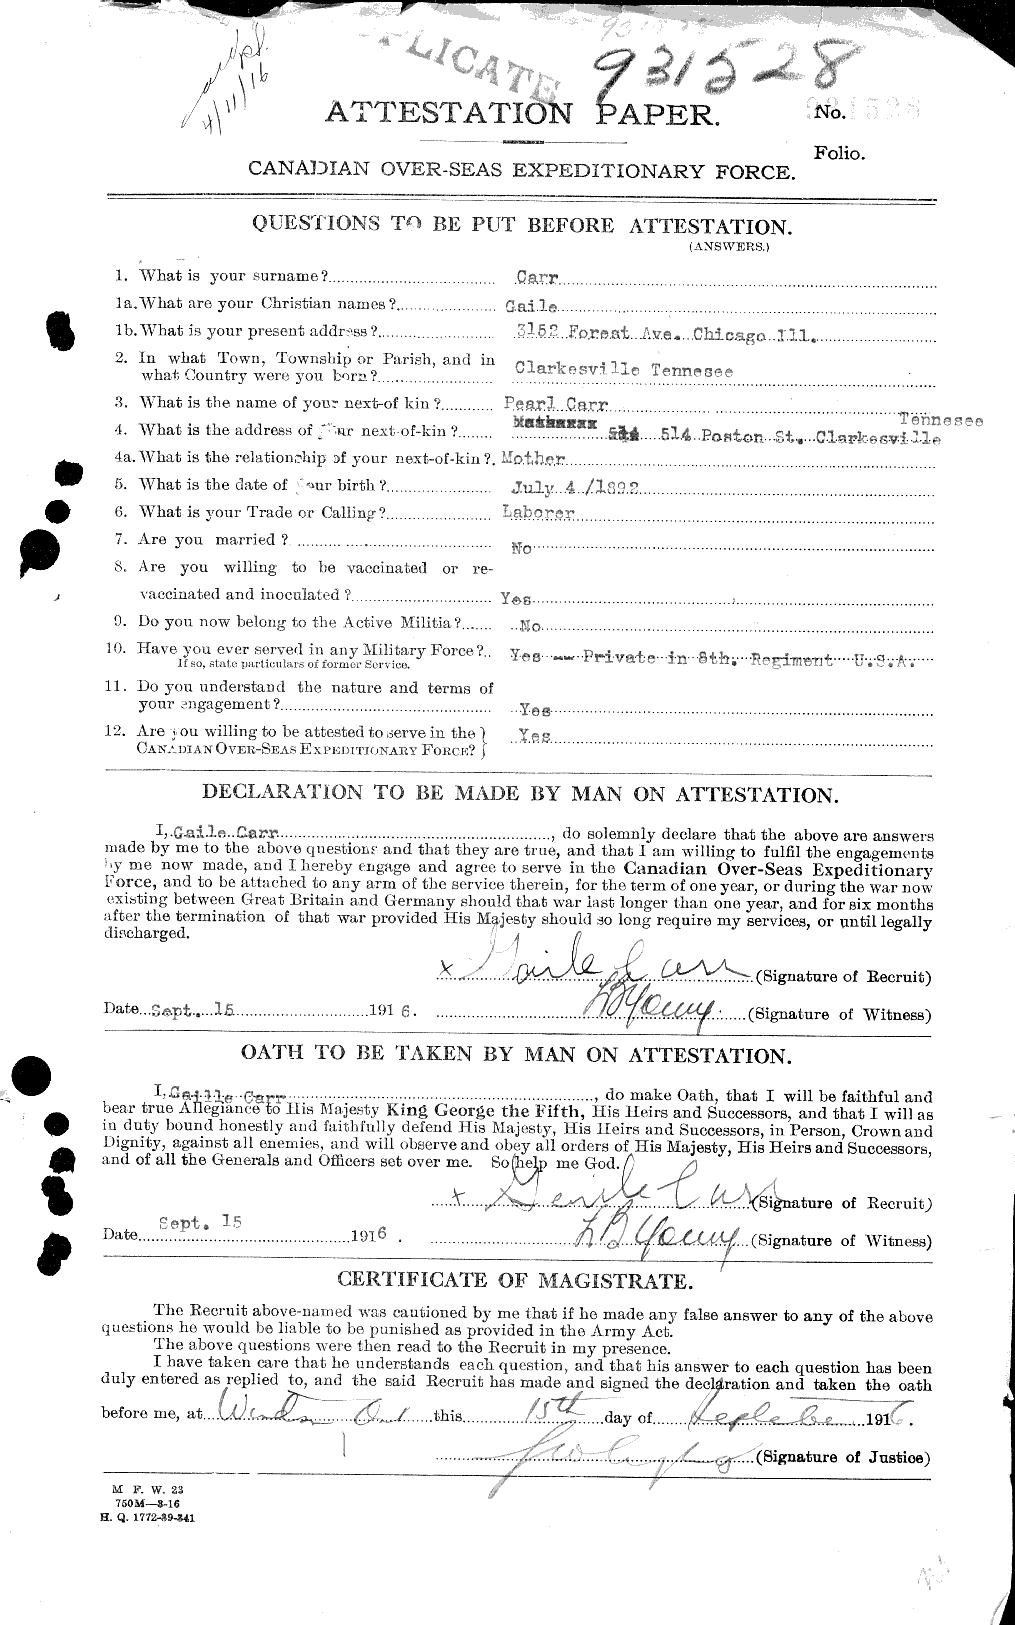 Personnel Records of the First World War - CEF 010275a